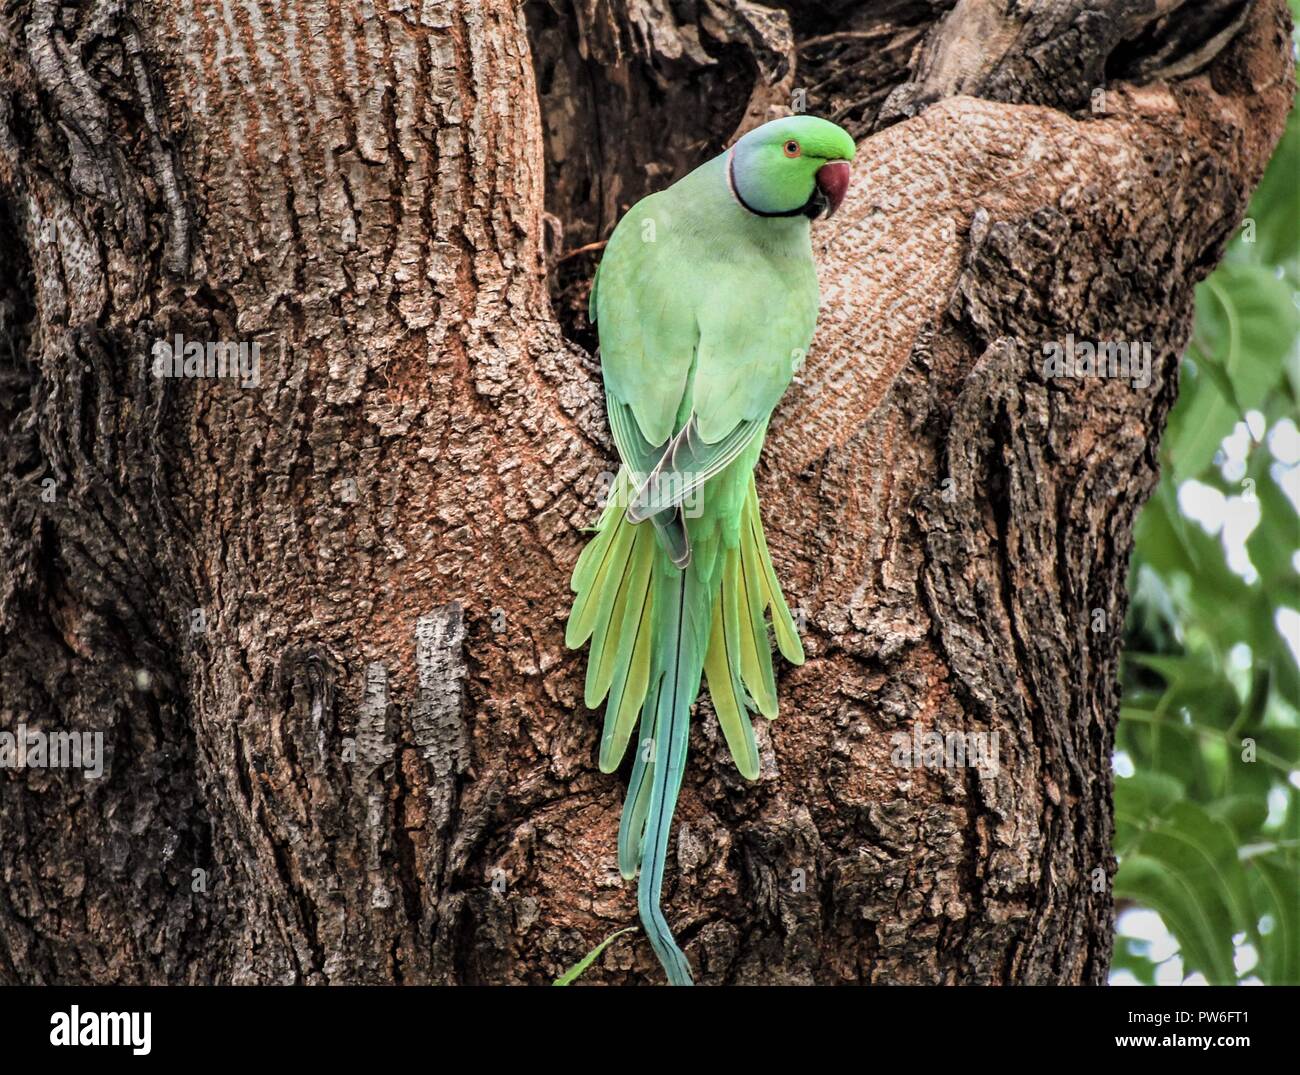 The rose-ringed parakeet (Psittacula krameri), also known as the ring-necked parakeet, is a medium-sized parrot in the genus Psittacula of the family Stock Photo